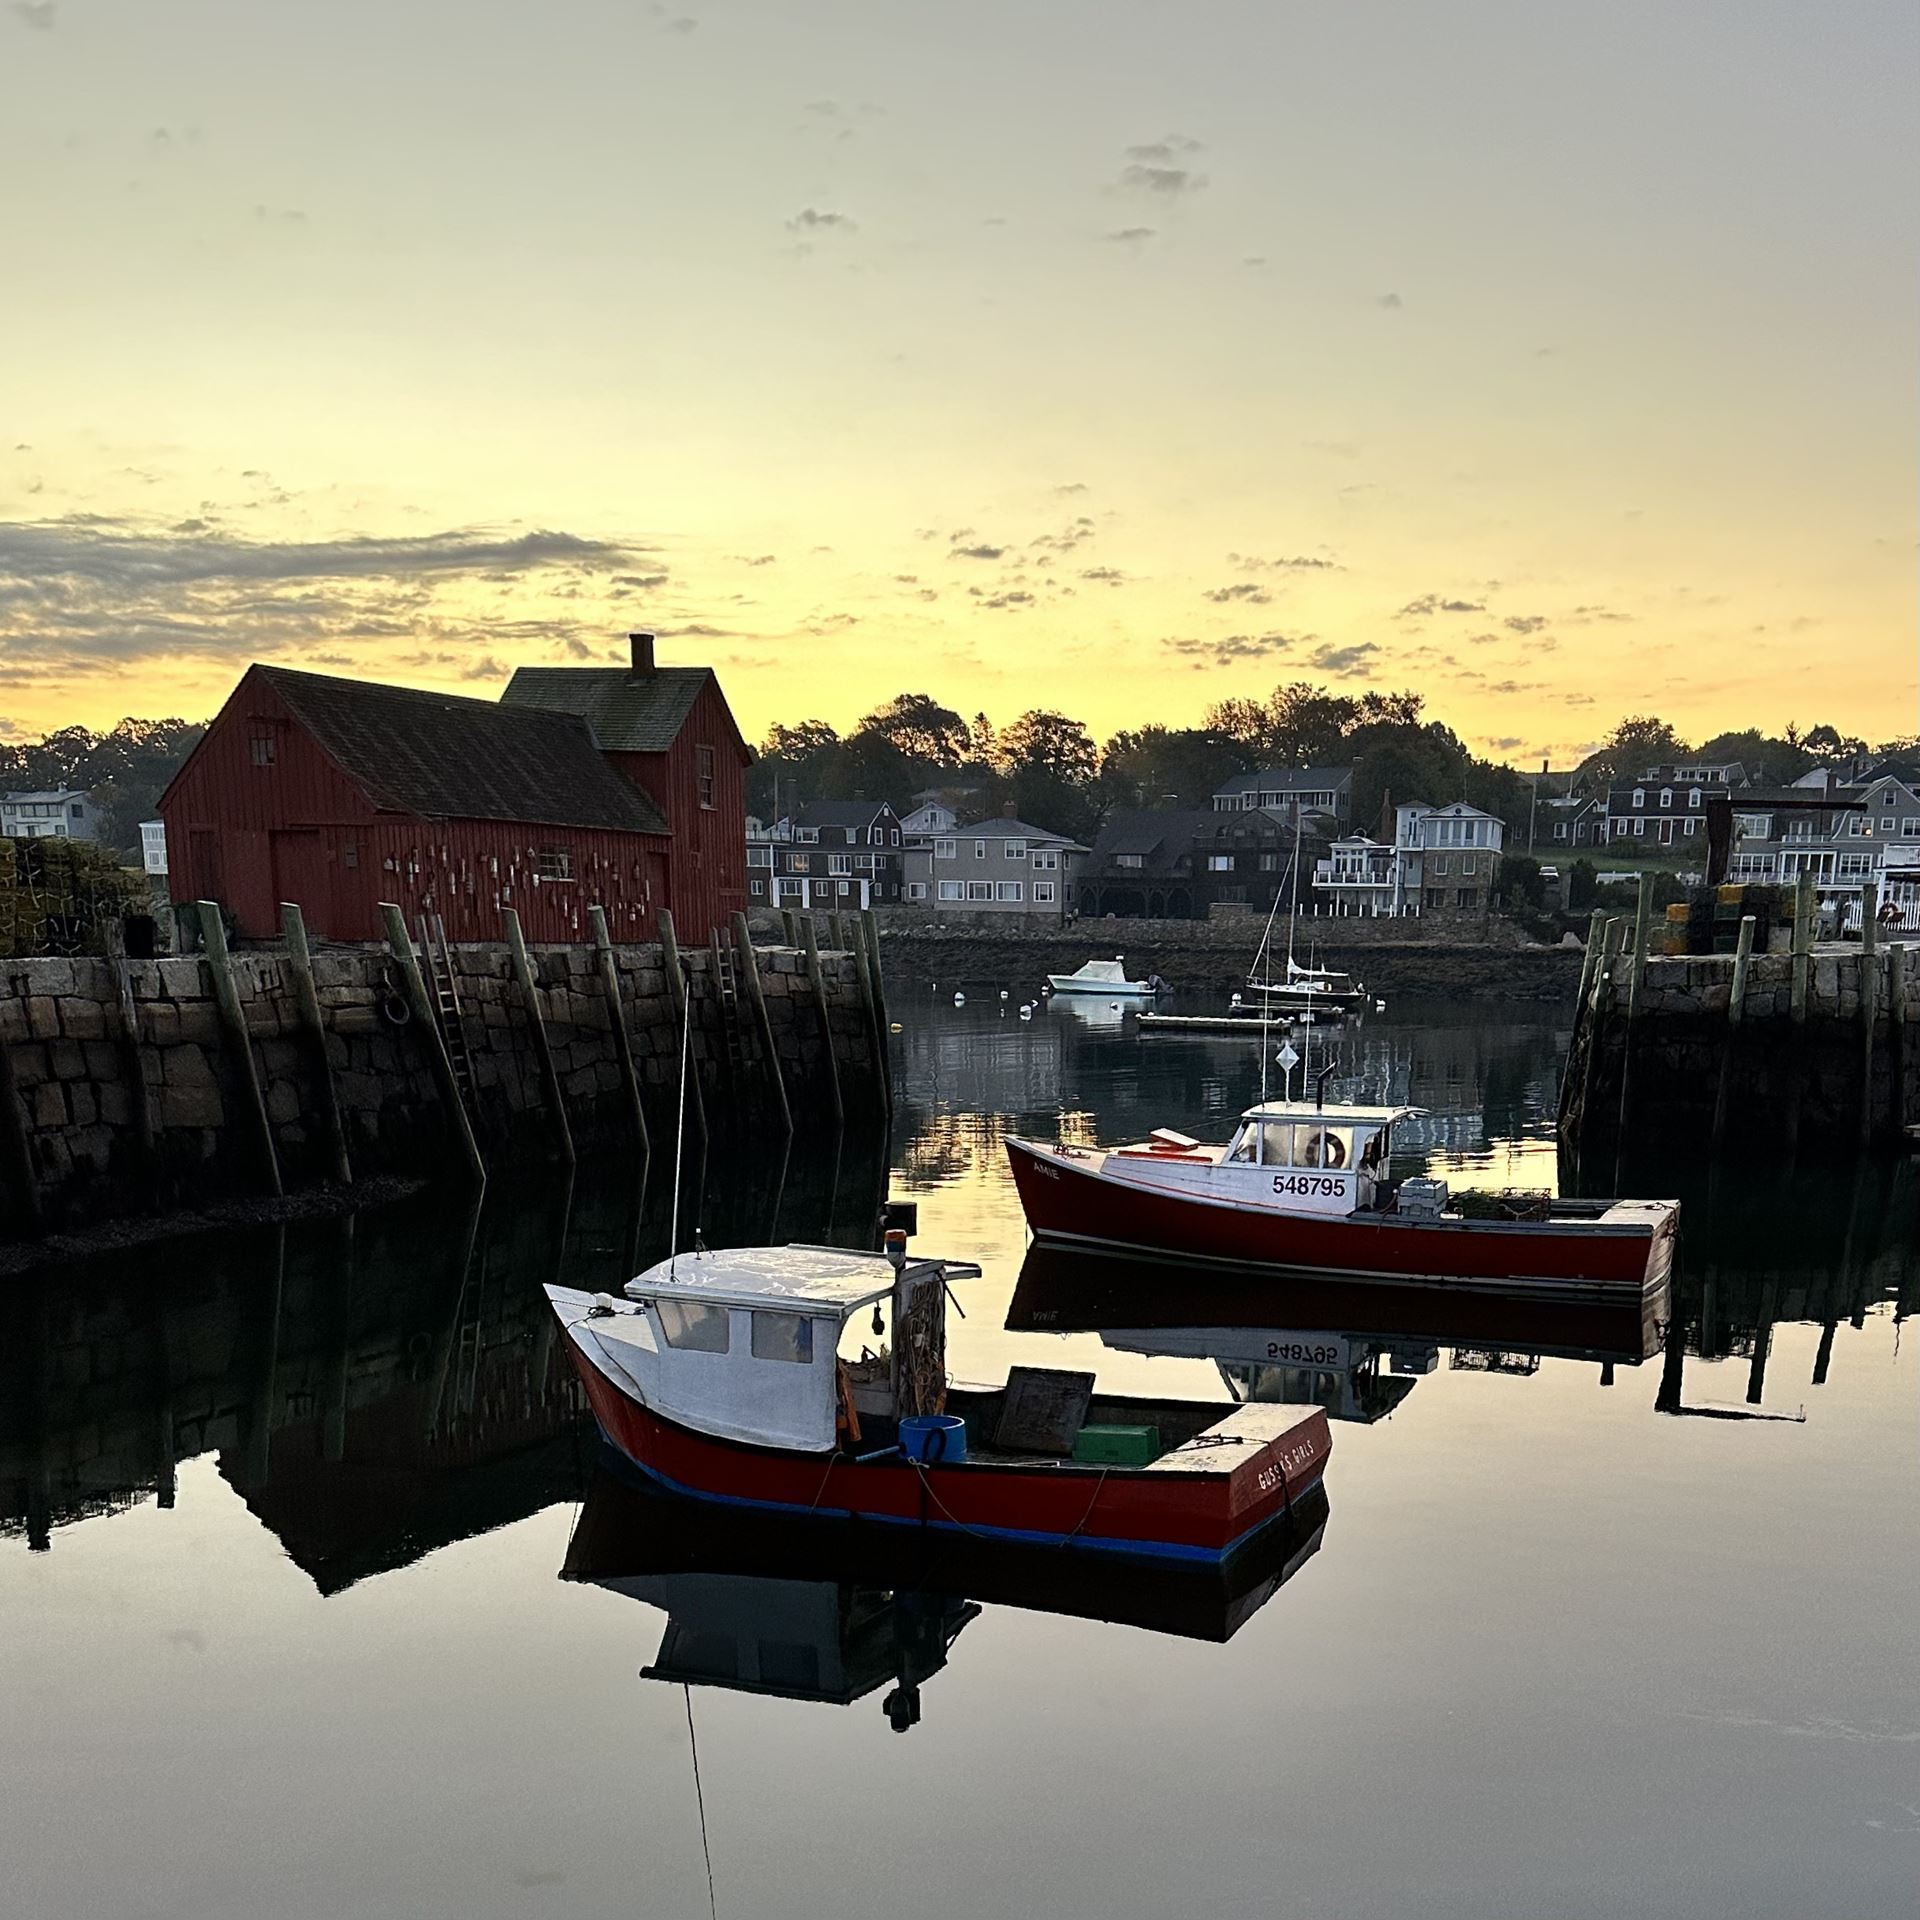 Boats on water at sunset in Rockport, Massachusetts